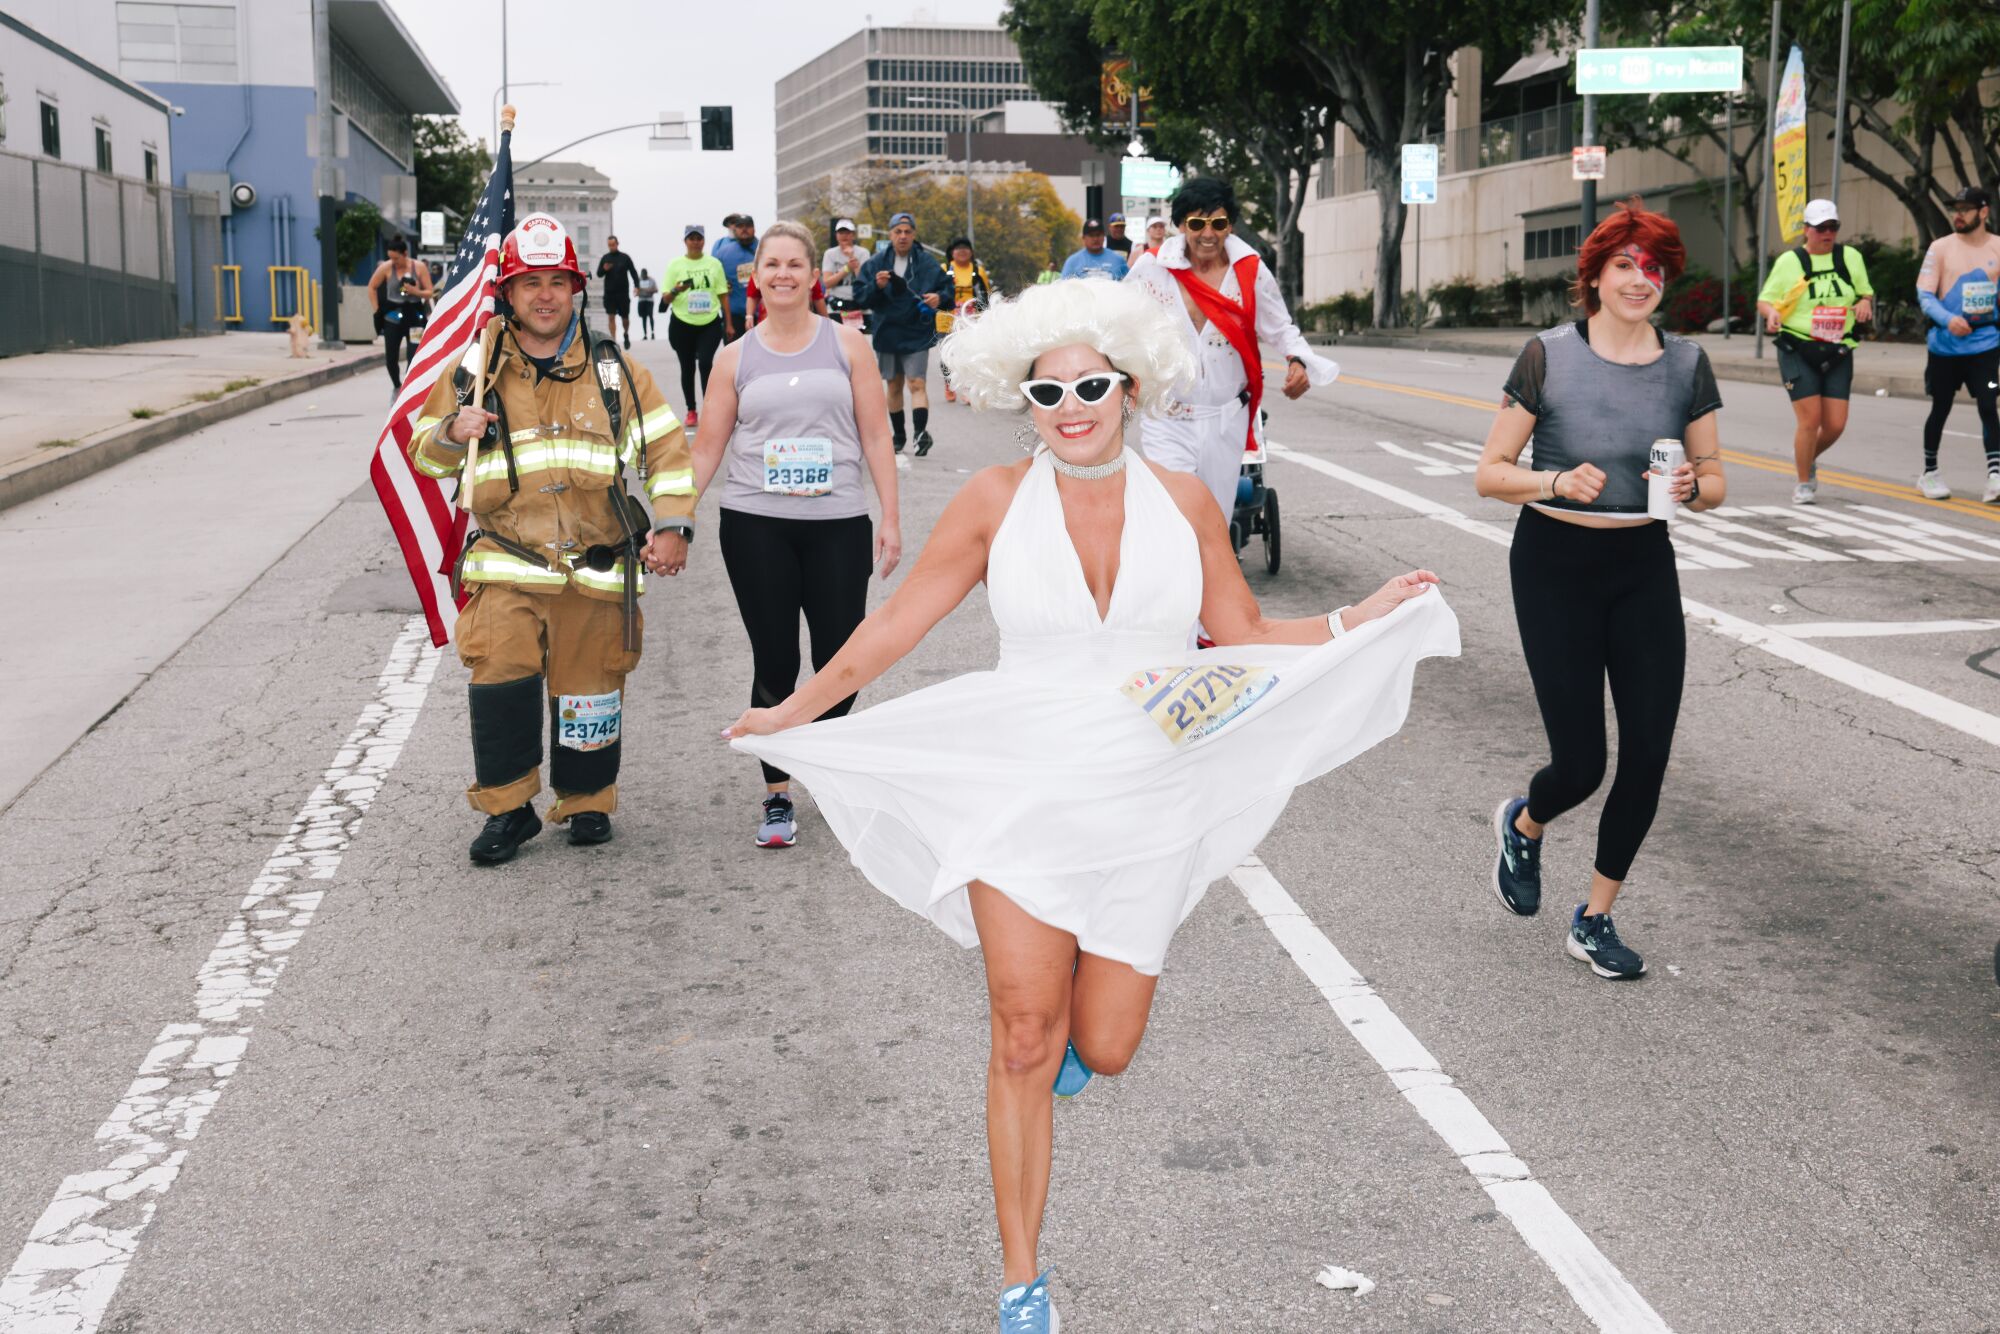 A runner dressed as Marilyn Monroe with a wig, sunglasses and a white dress.